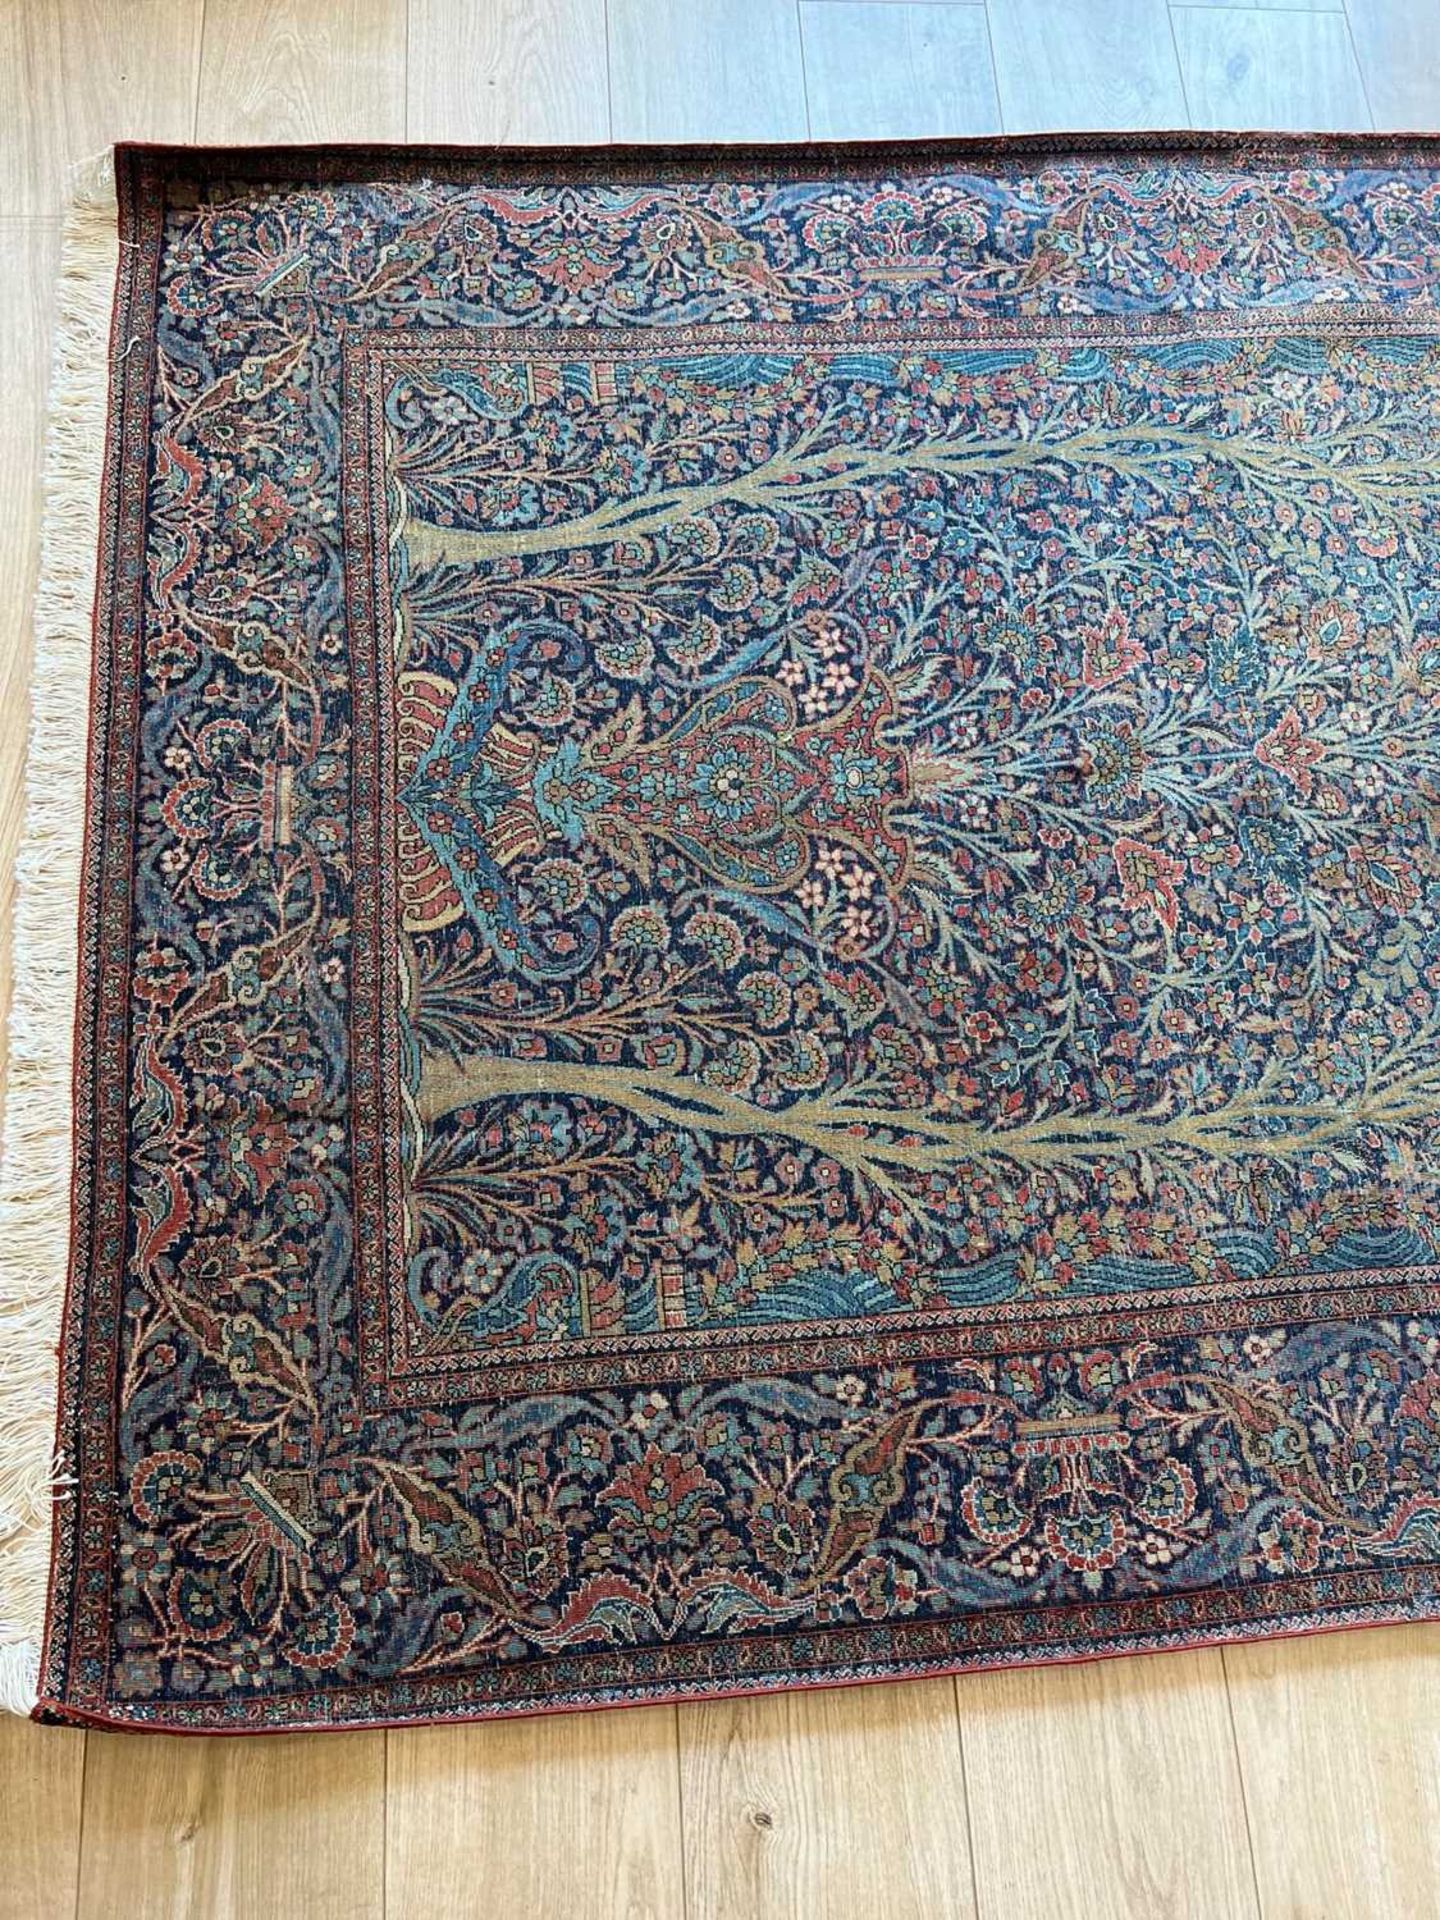 A FINE PAIR OF 1920'S MOHTASHAM KASHAN CARPETS - Image 13 of 38